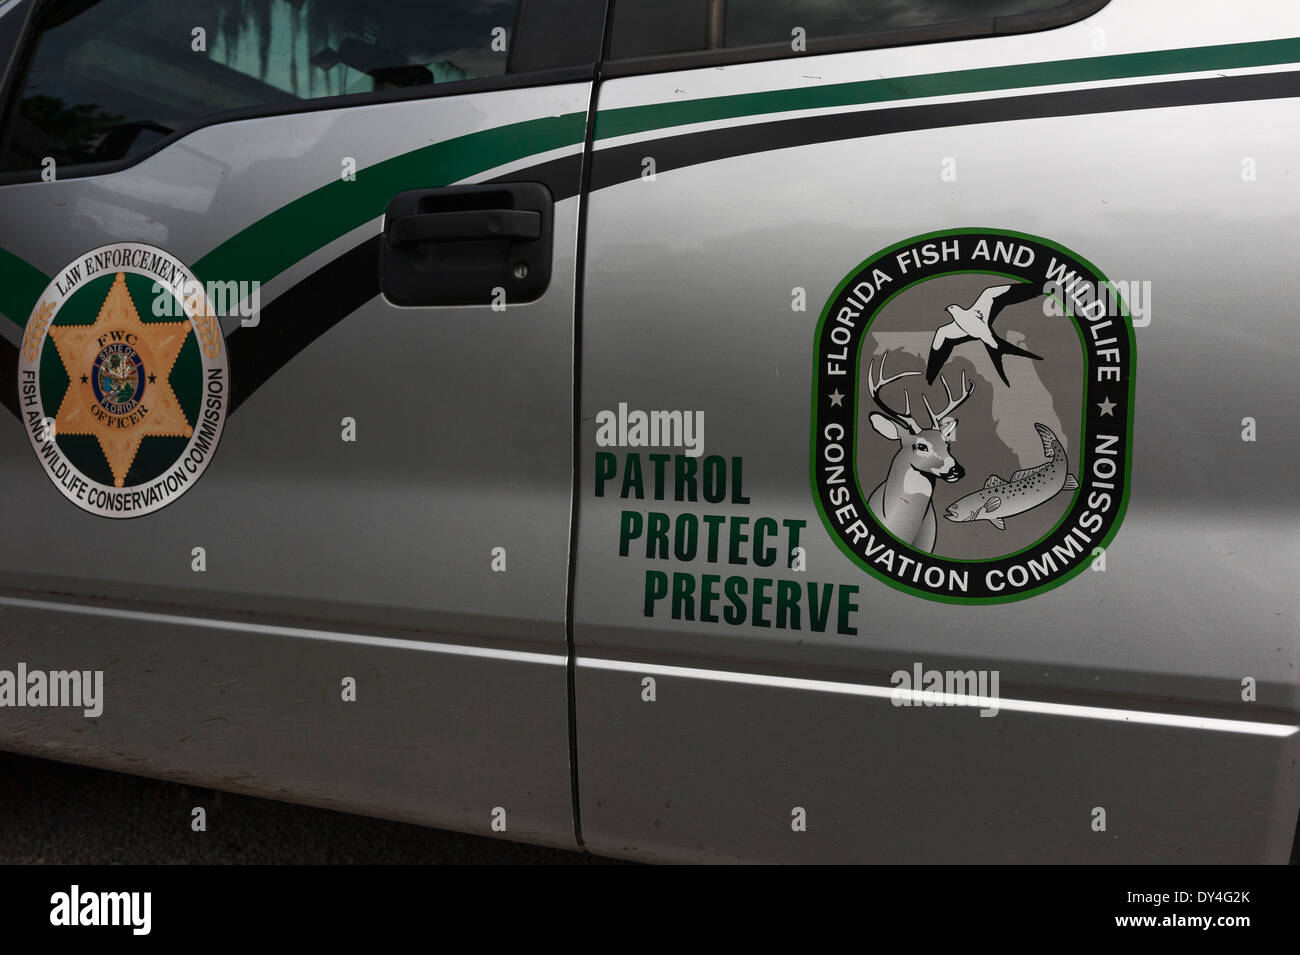 Florida Law Enforcement Fish and Wildlife Conservation Commission Vehicle Stock Photo